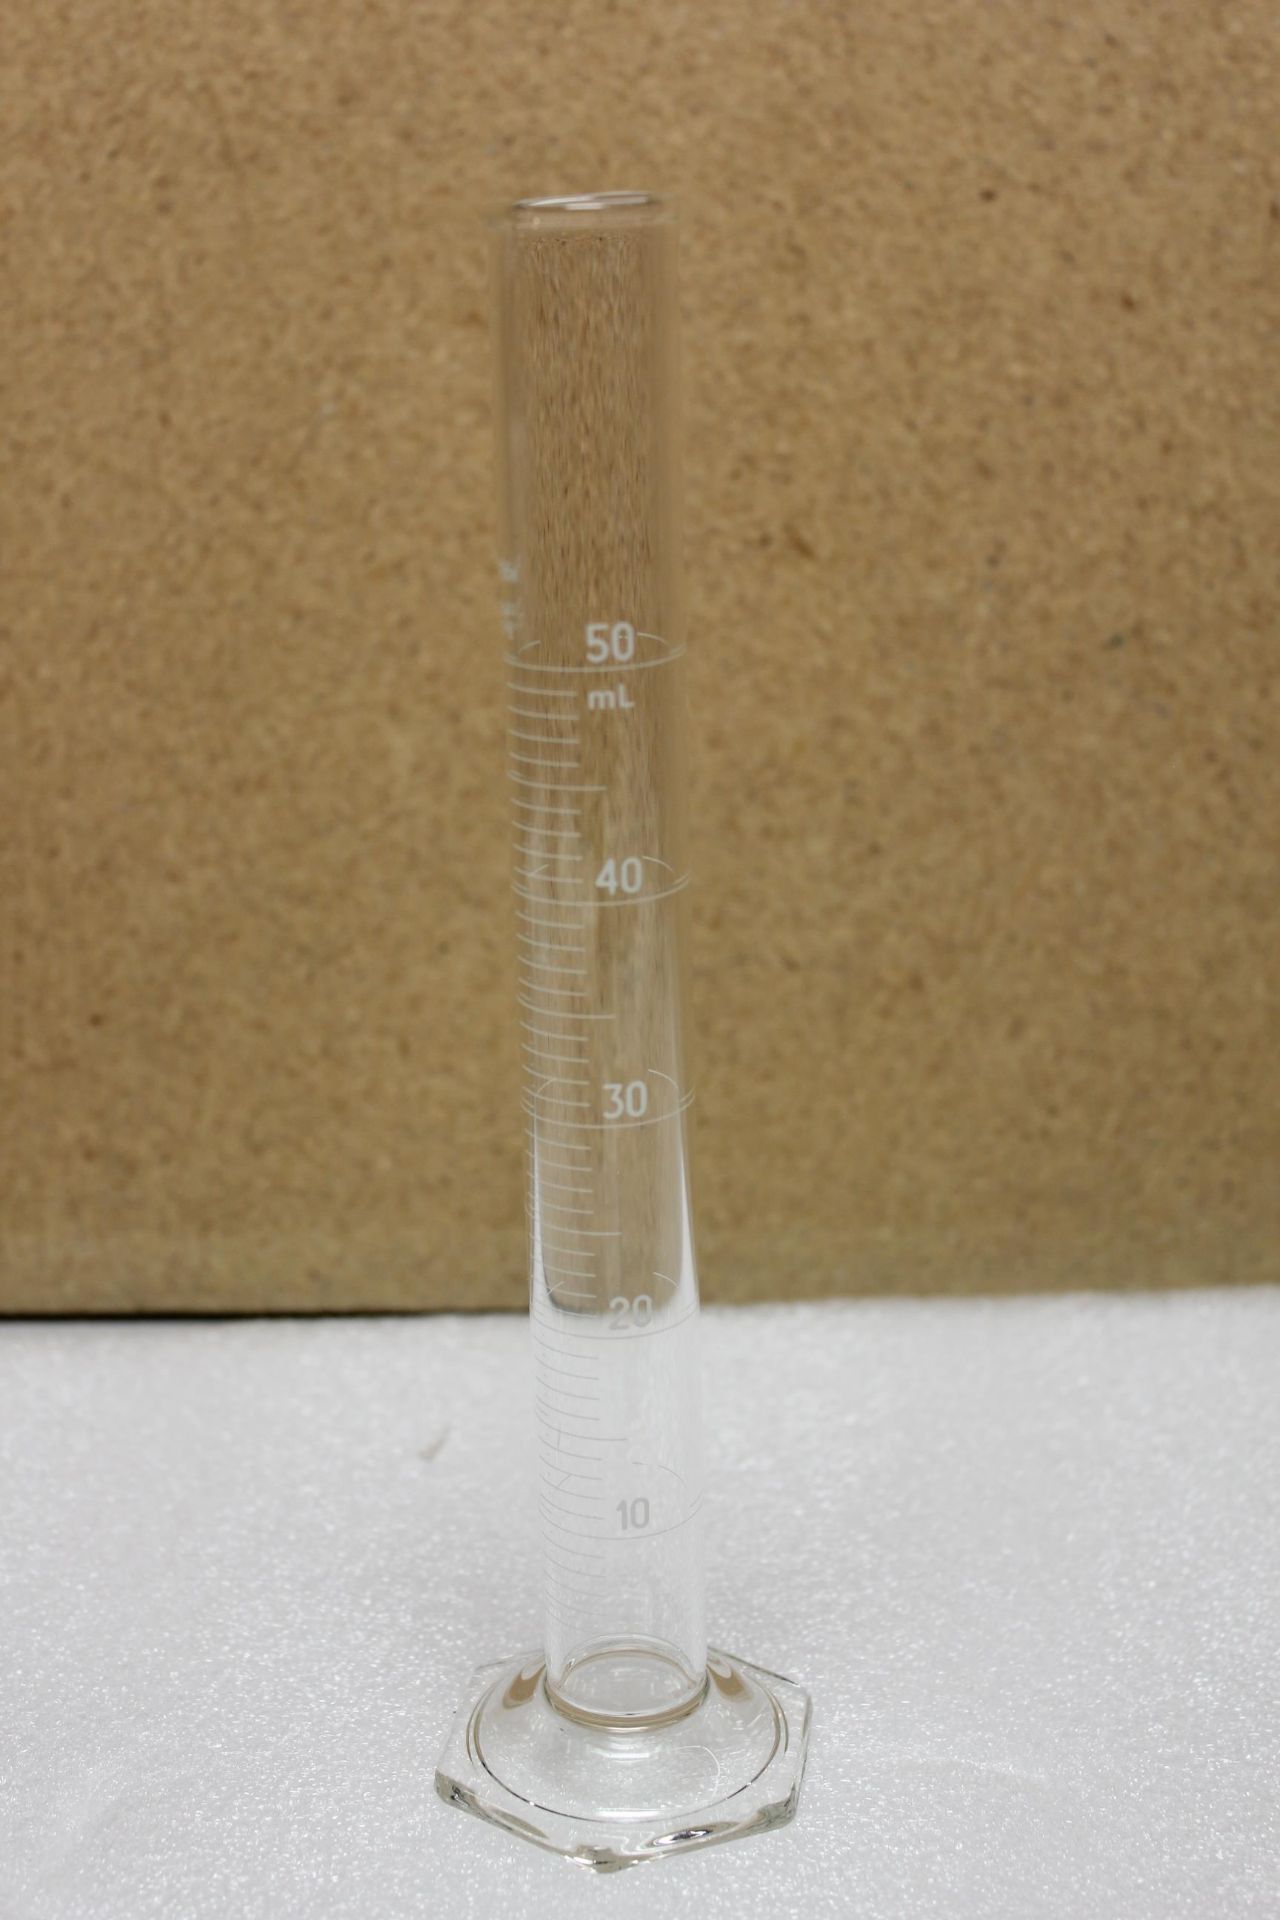 NEW PYREX 50ML GRADUATED CYLINDER LAB GLASS - Image 4 of 4